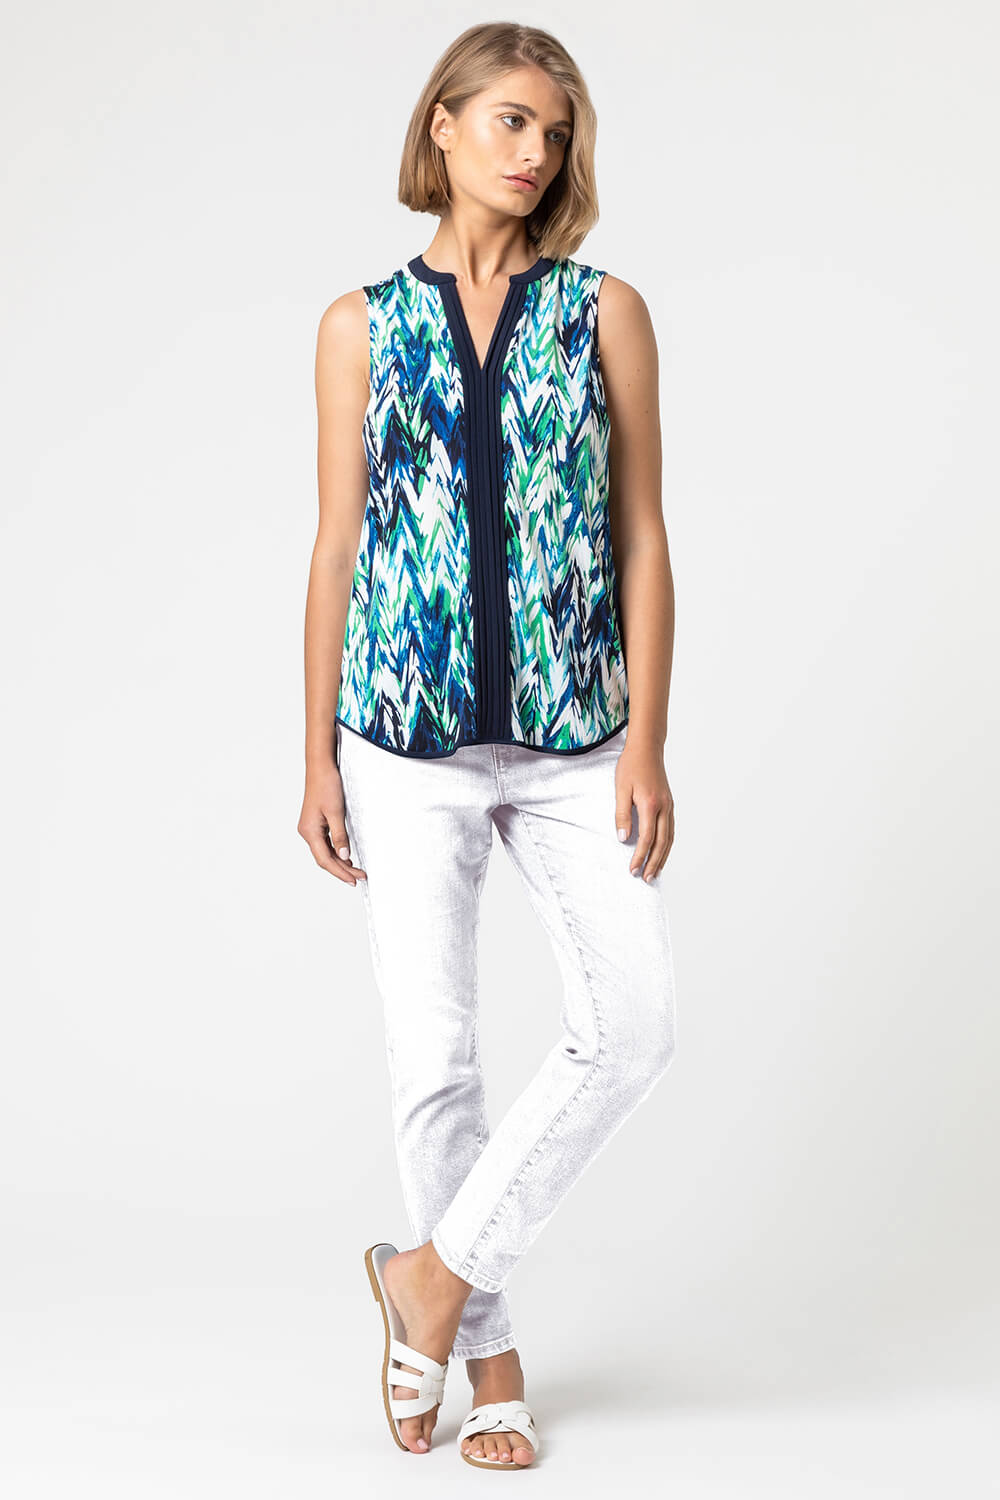 Green Abstract Print Notch Neck Sleeveless Top, Image 3 of 4